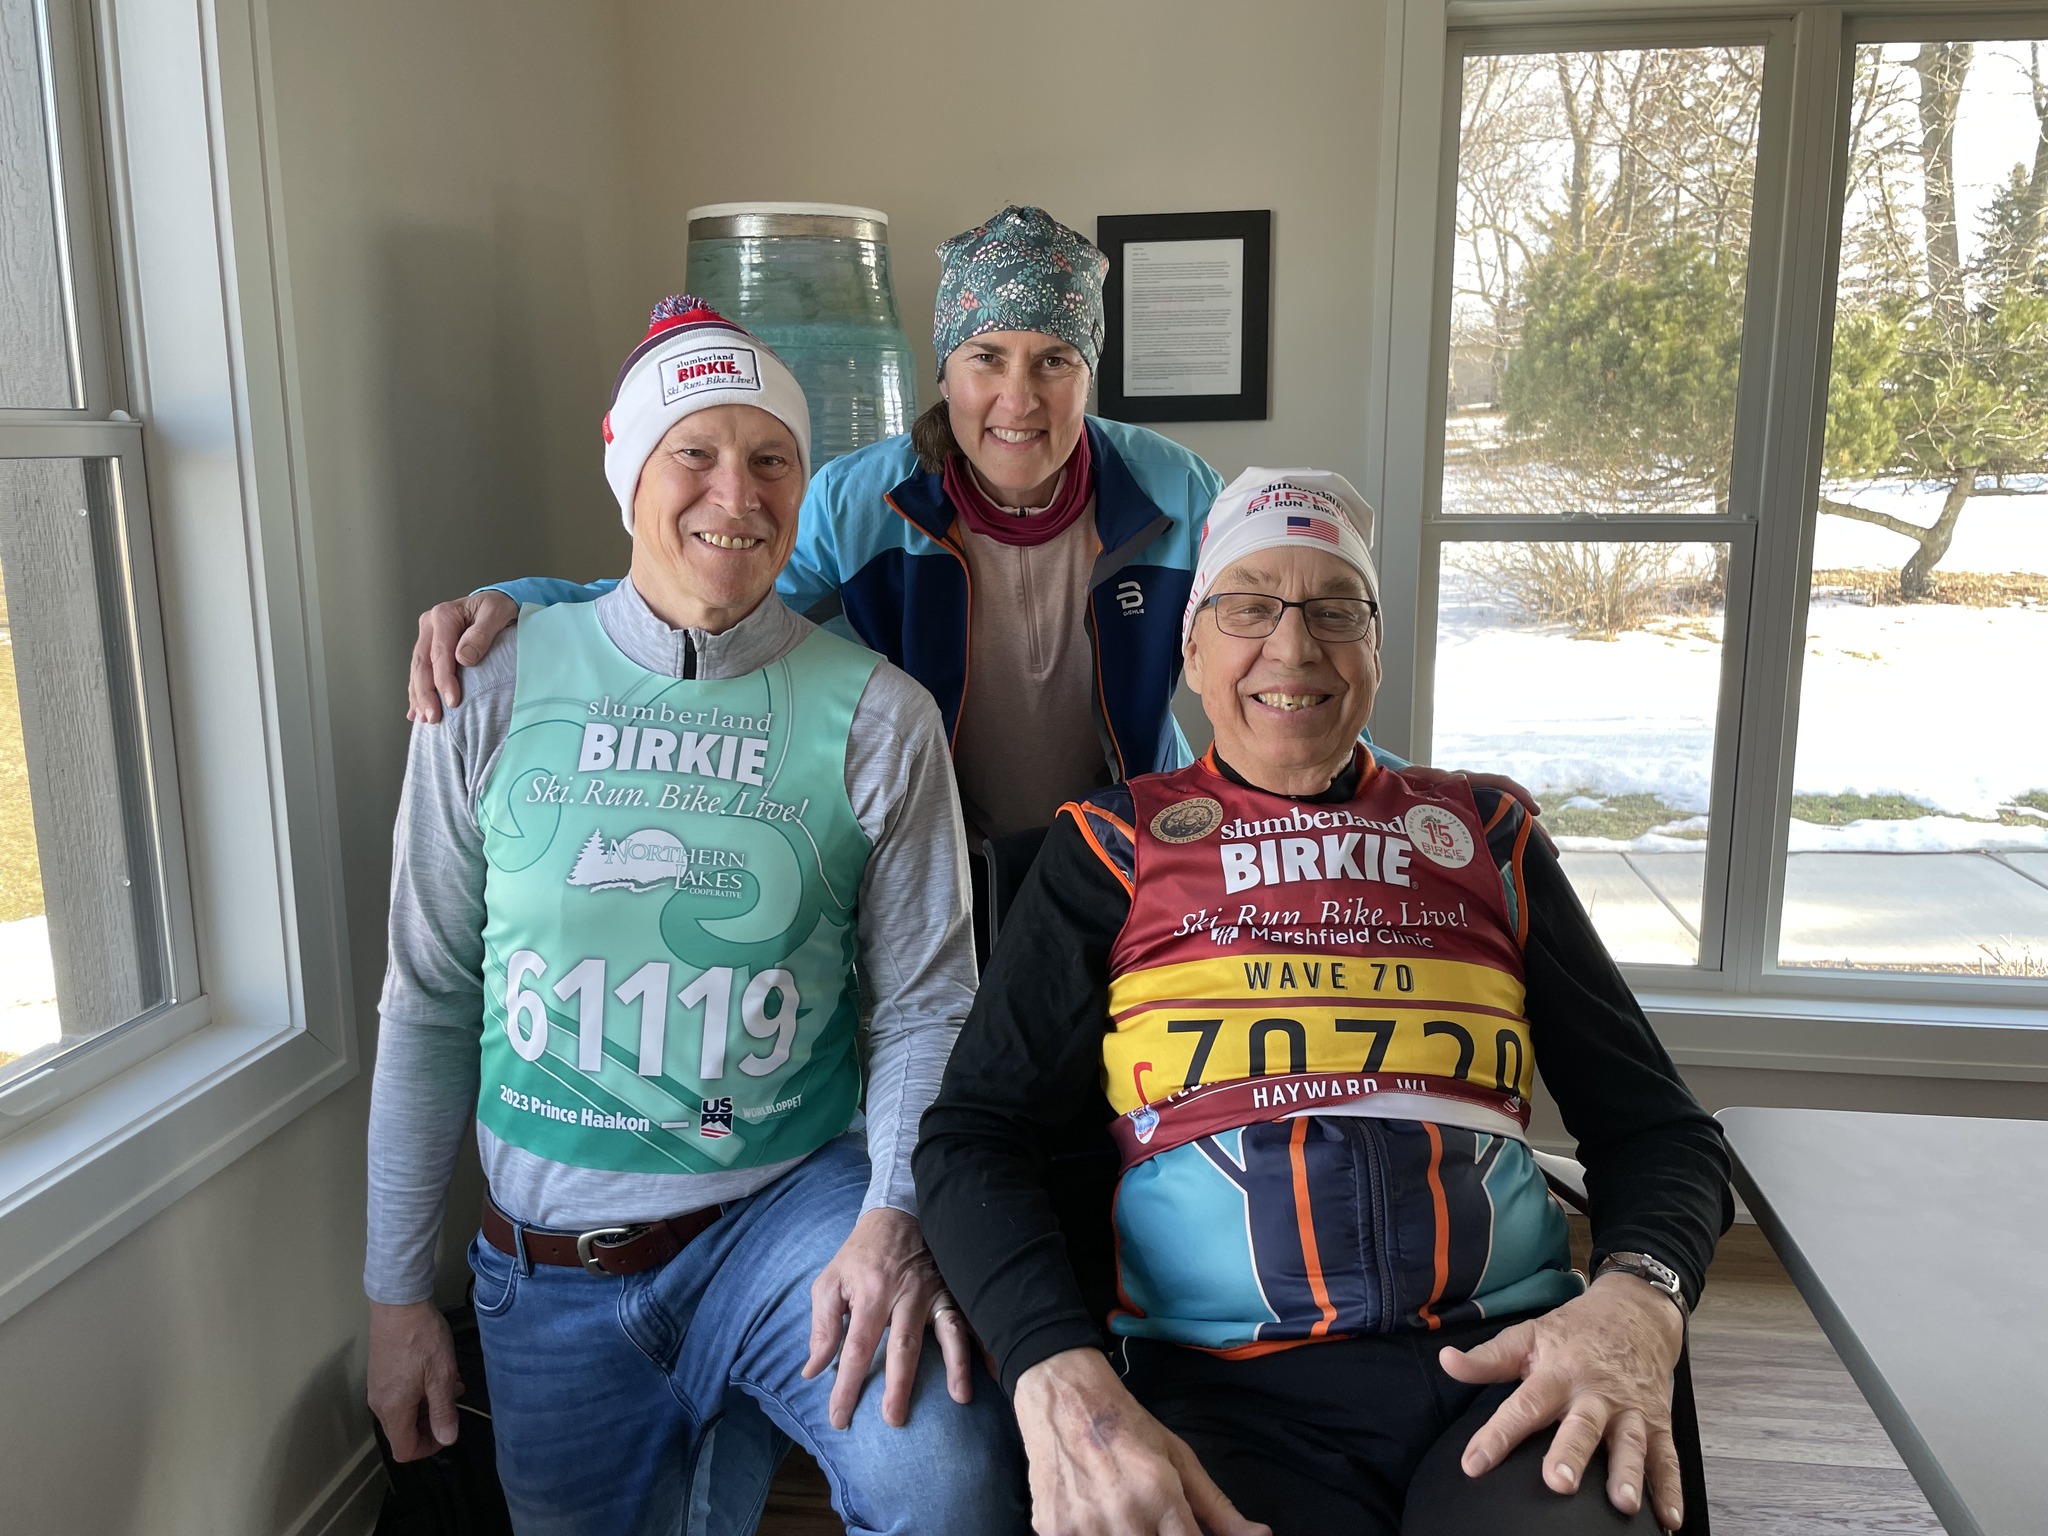 Three people posing in a living room wearing ski bibs and hats.